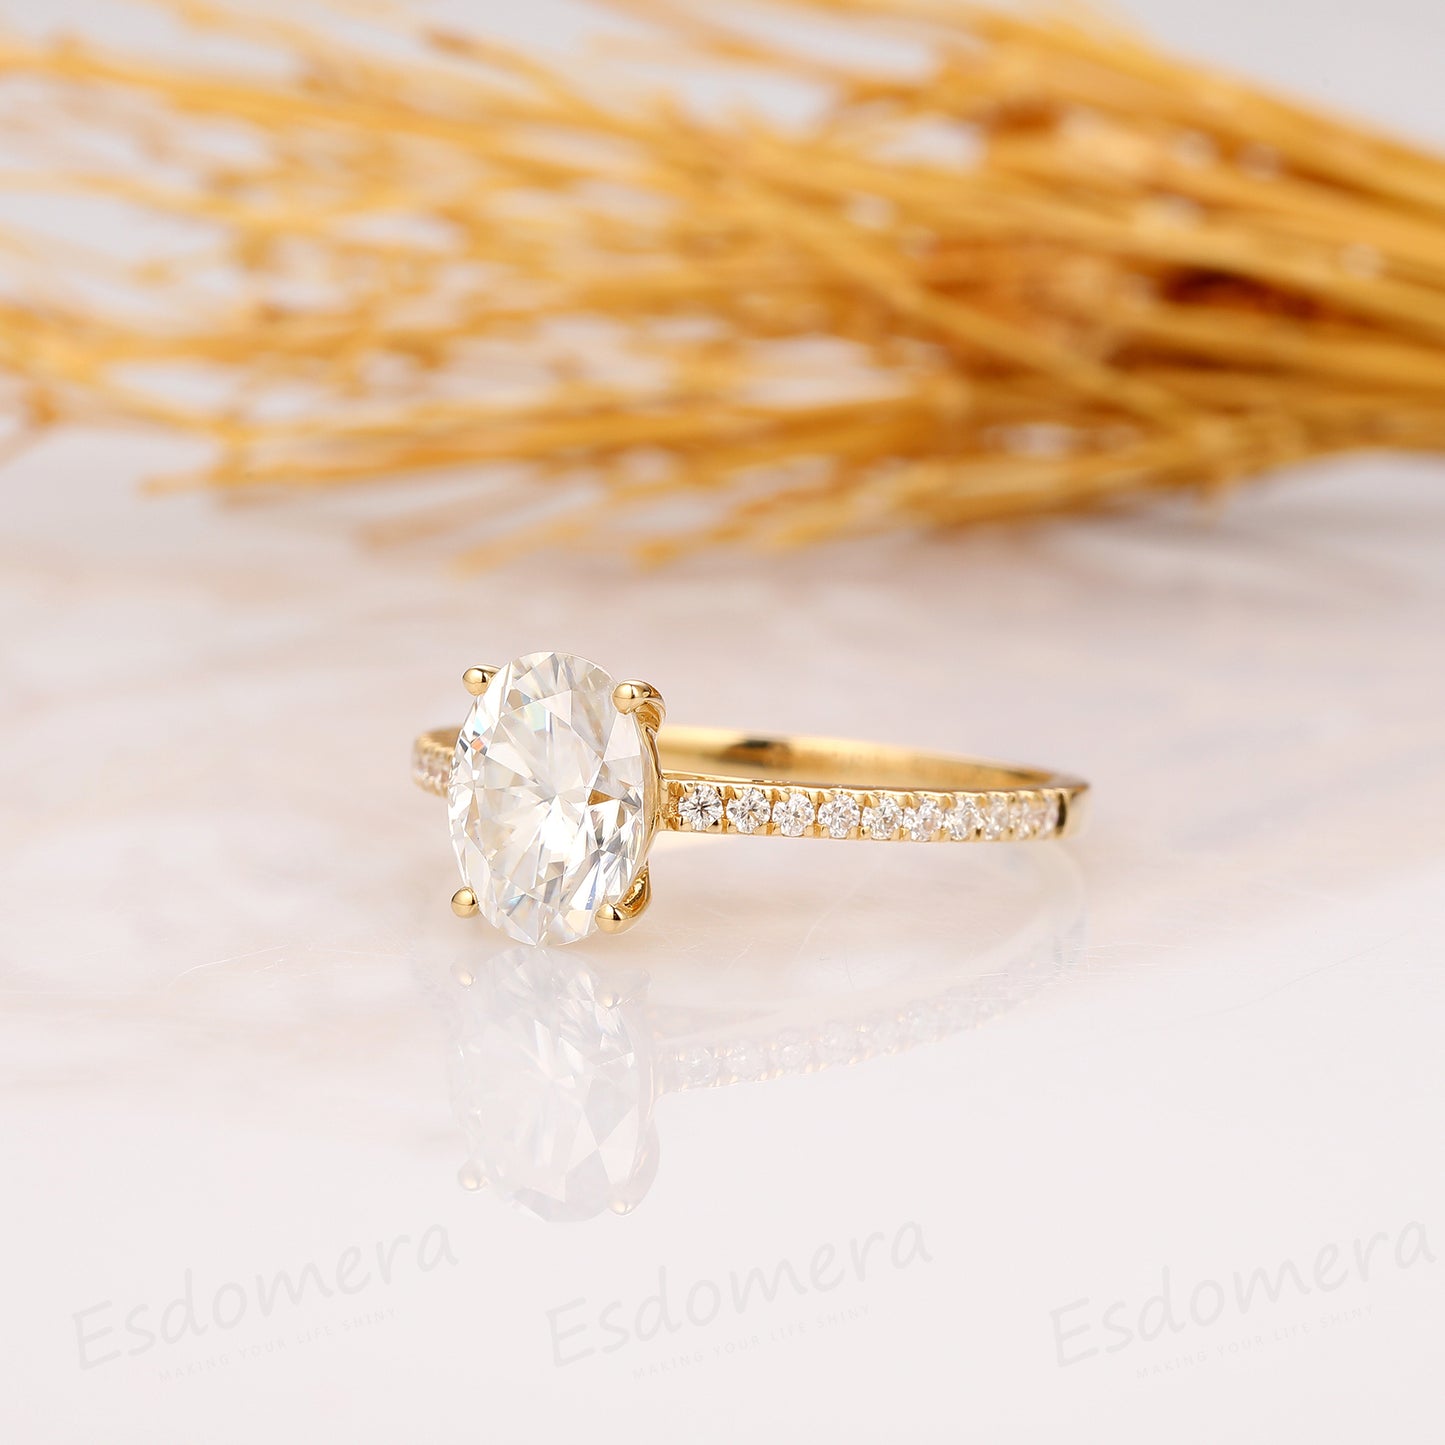 Oval Moissanite Ring, Oval Cut 1.5CT Moissanite Engagement Ring, 14k Yellow Gold Wedding Ring